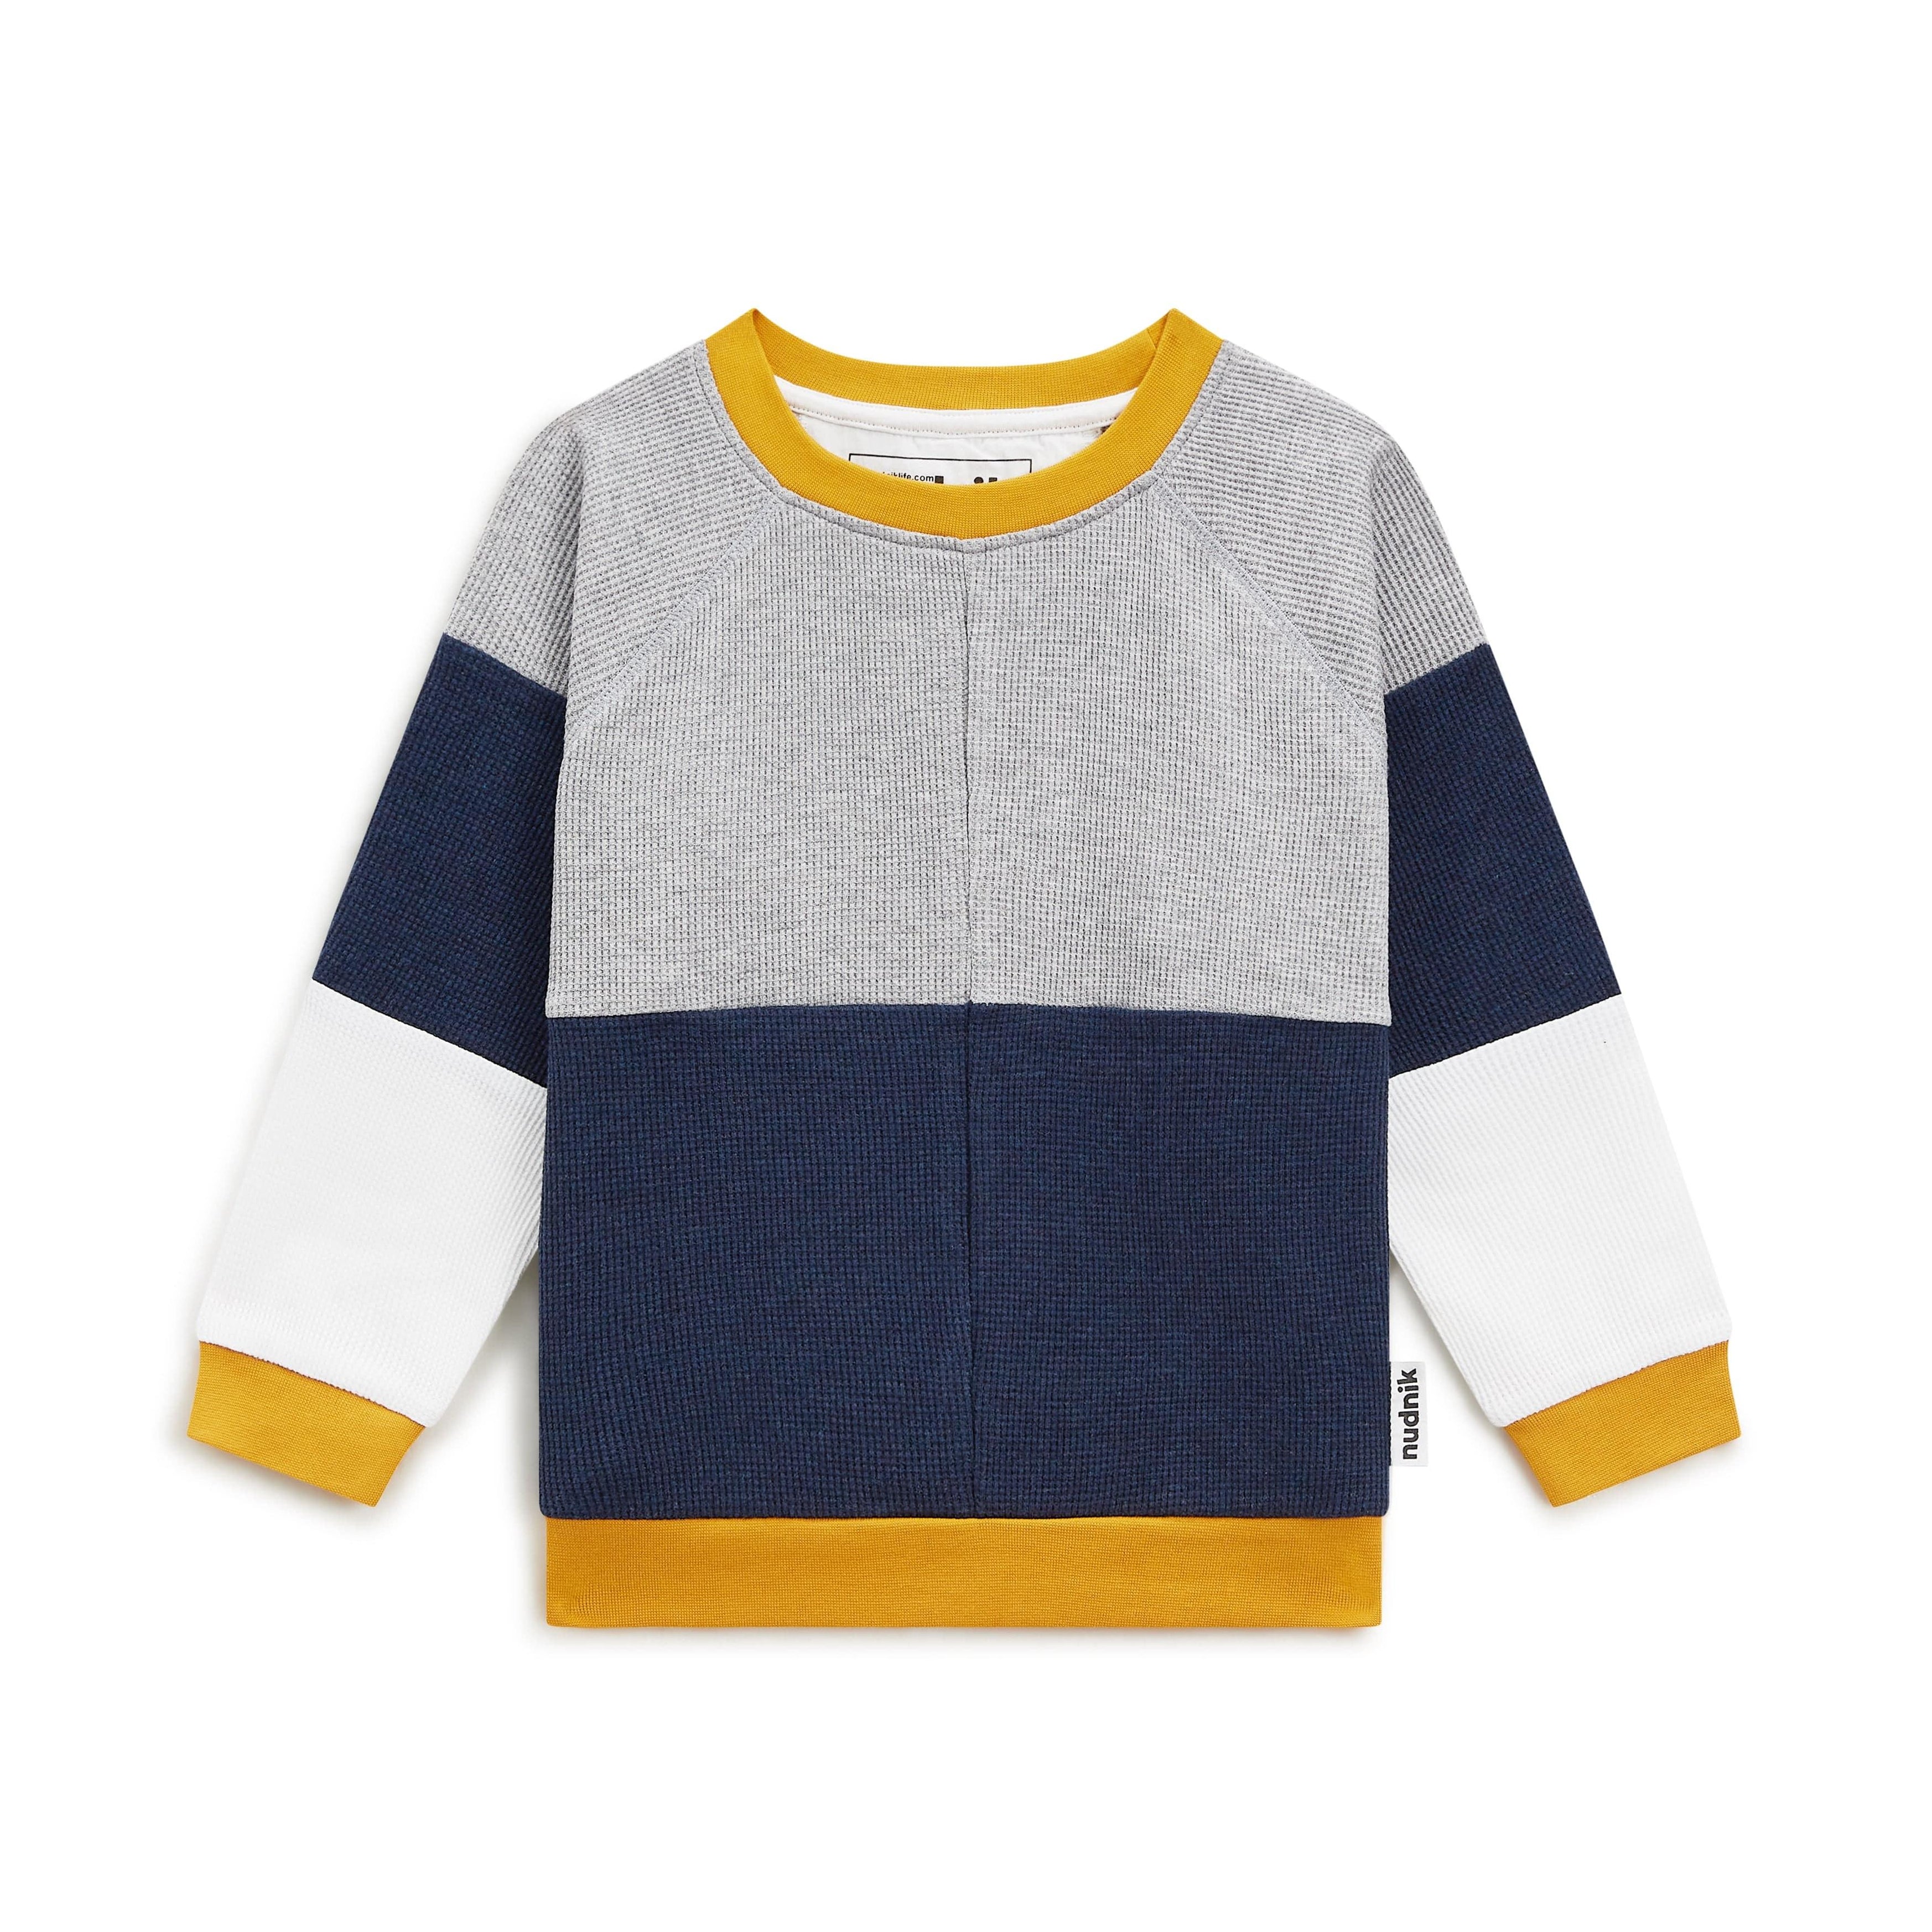 All Things Dylan | Cool Clothes for Kids